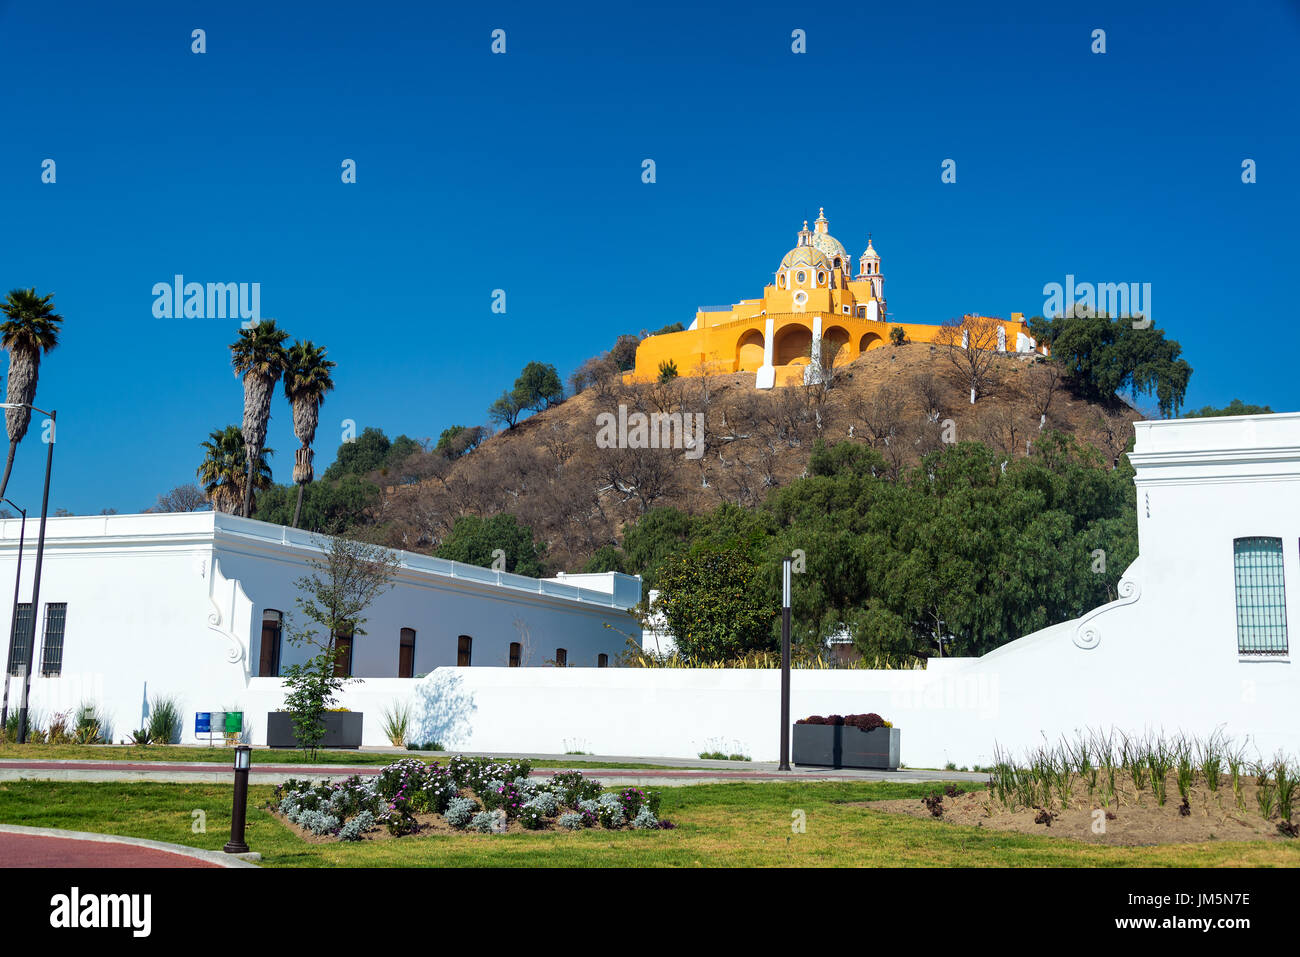 Our Lady of Remedies church on a hill overlooking Cholula, Mexico Stock Photo